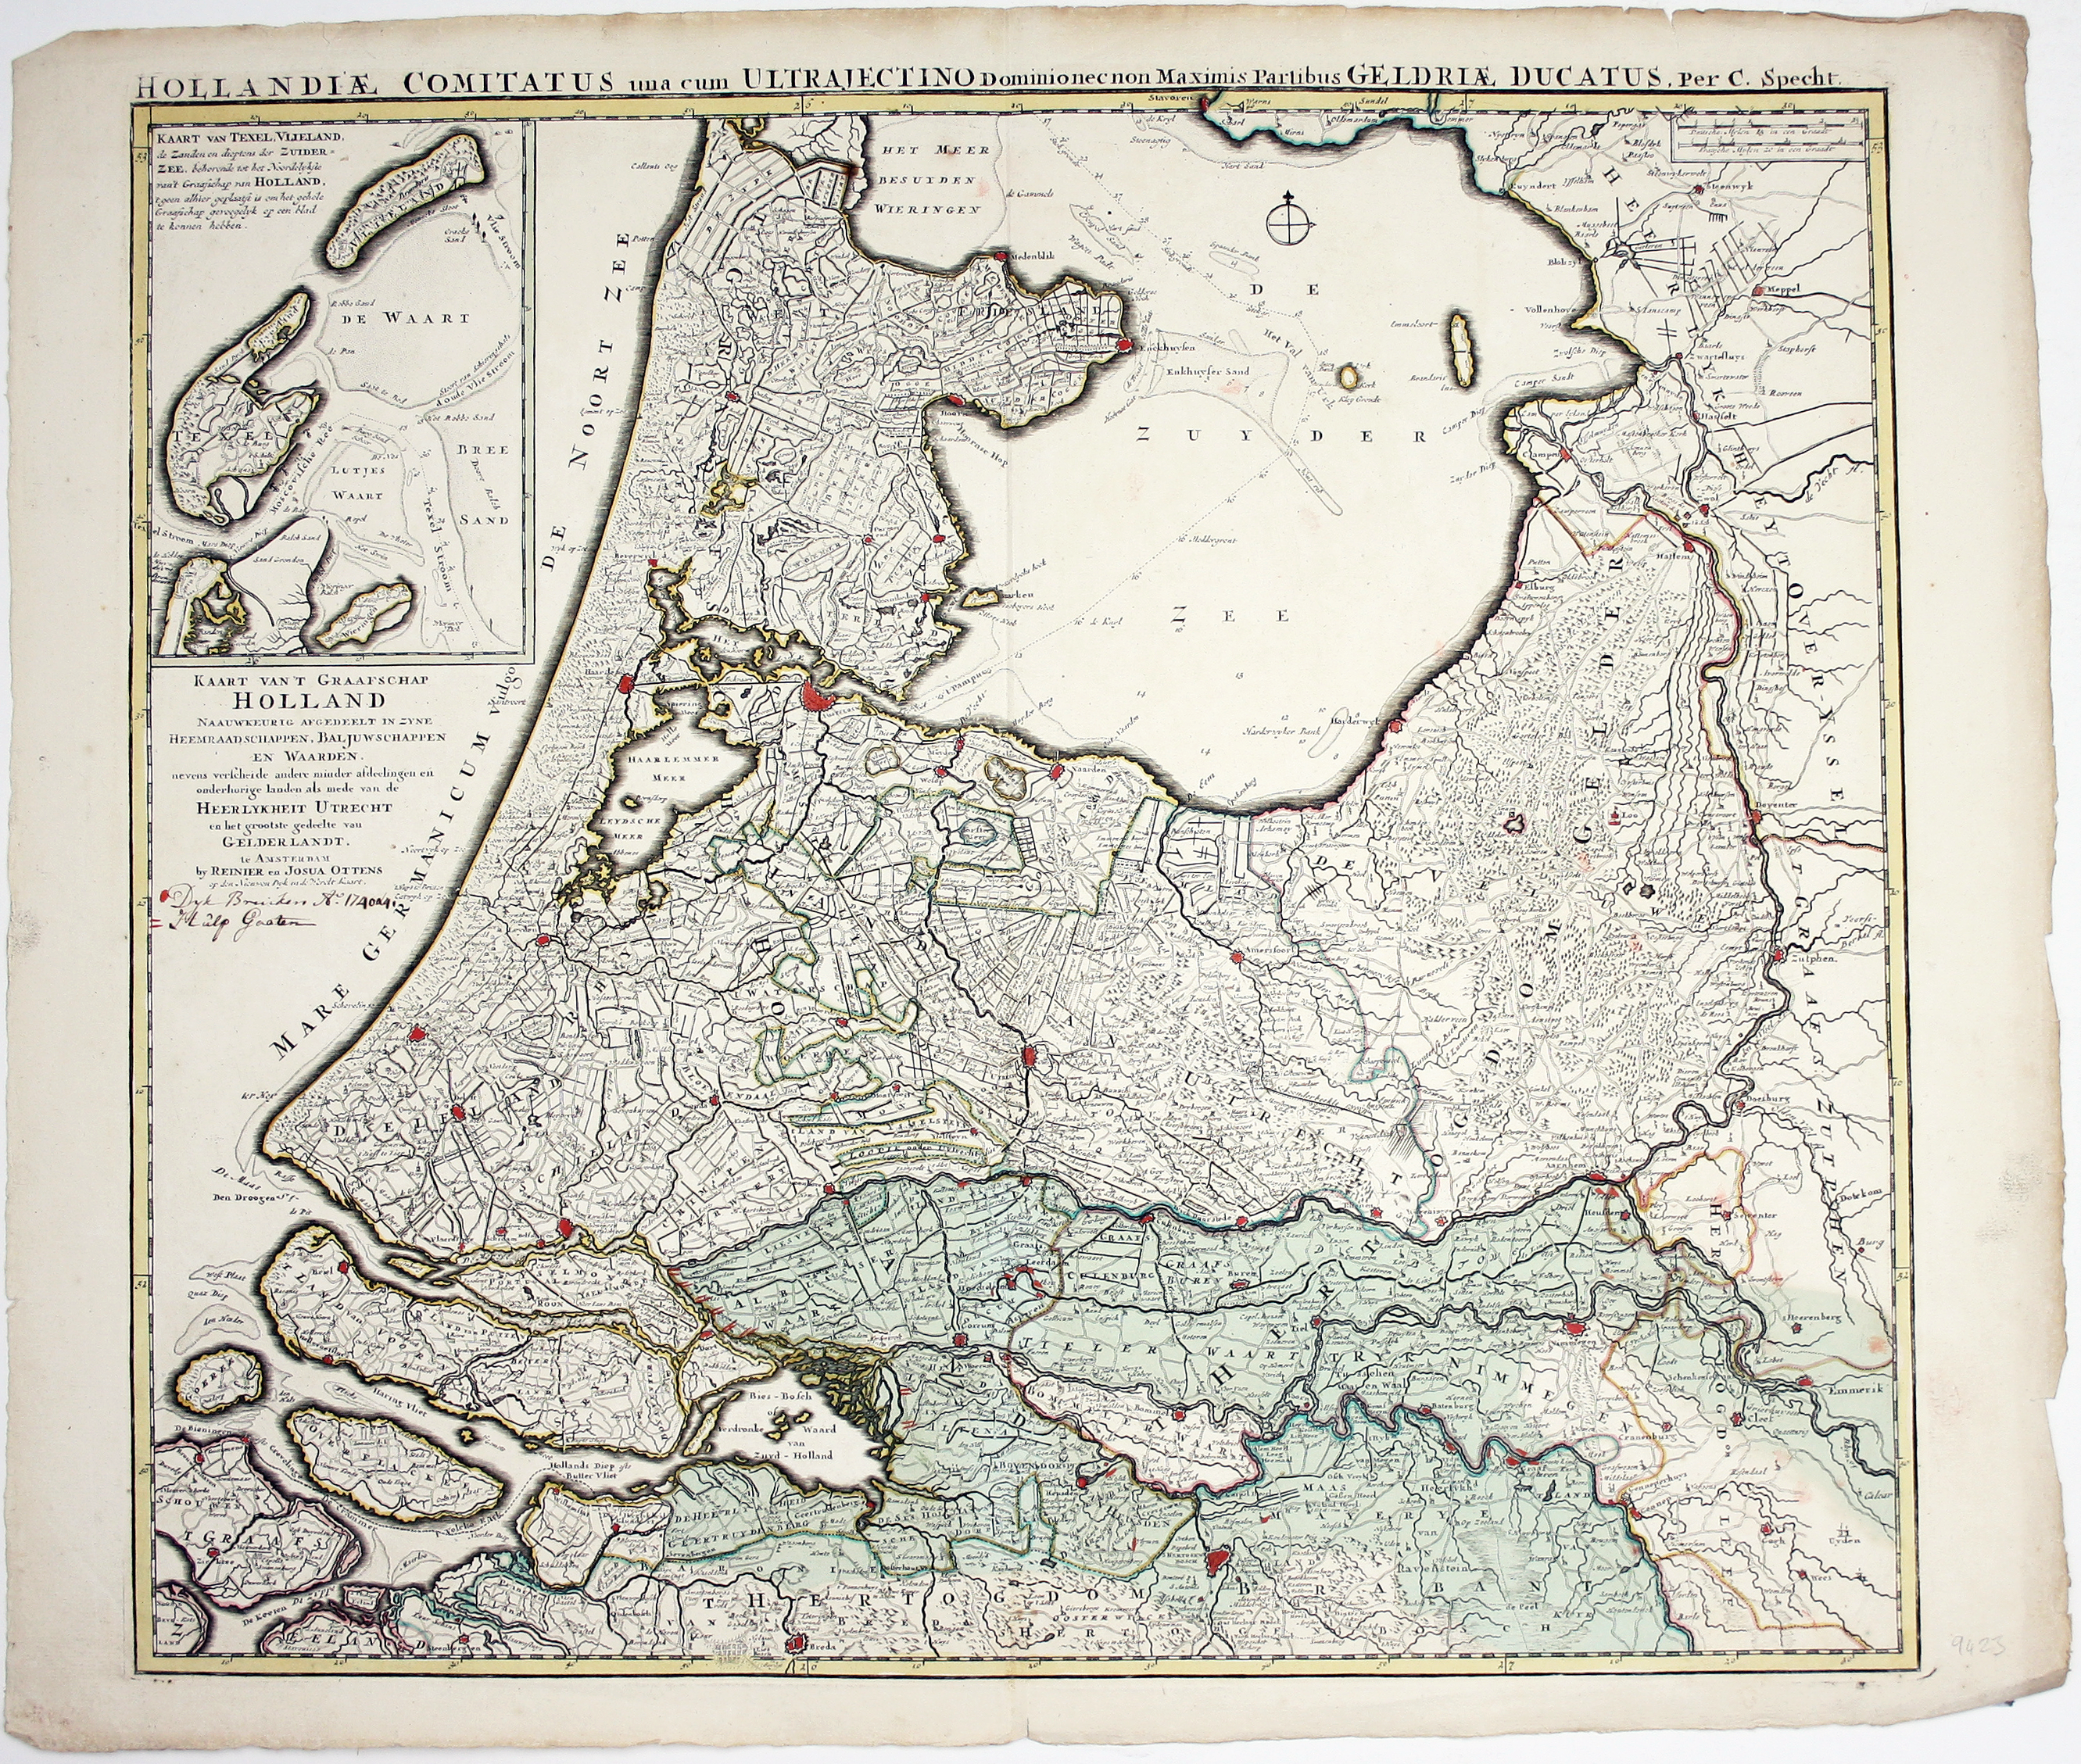 Ottens’ Map of the Central Netherlands